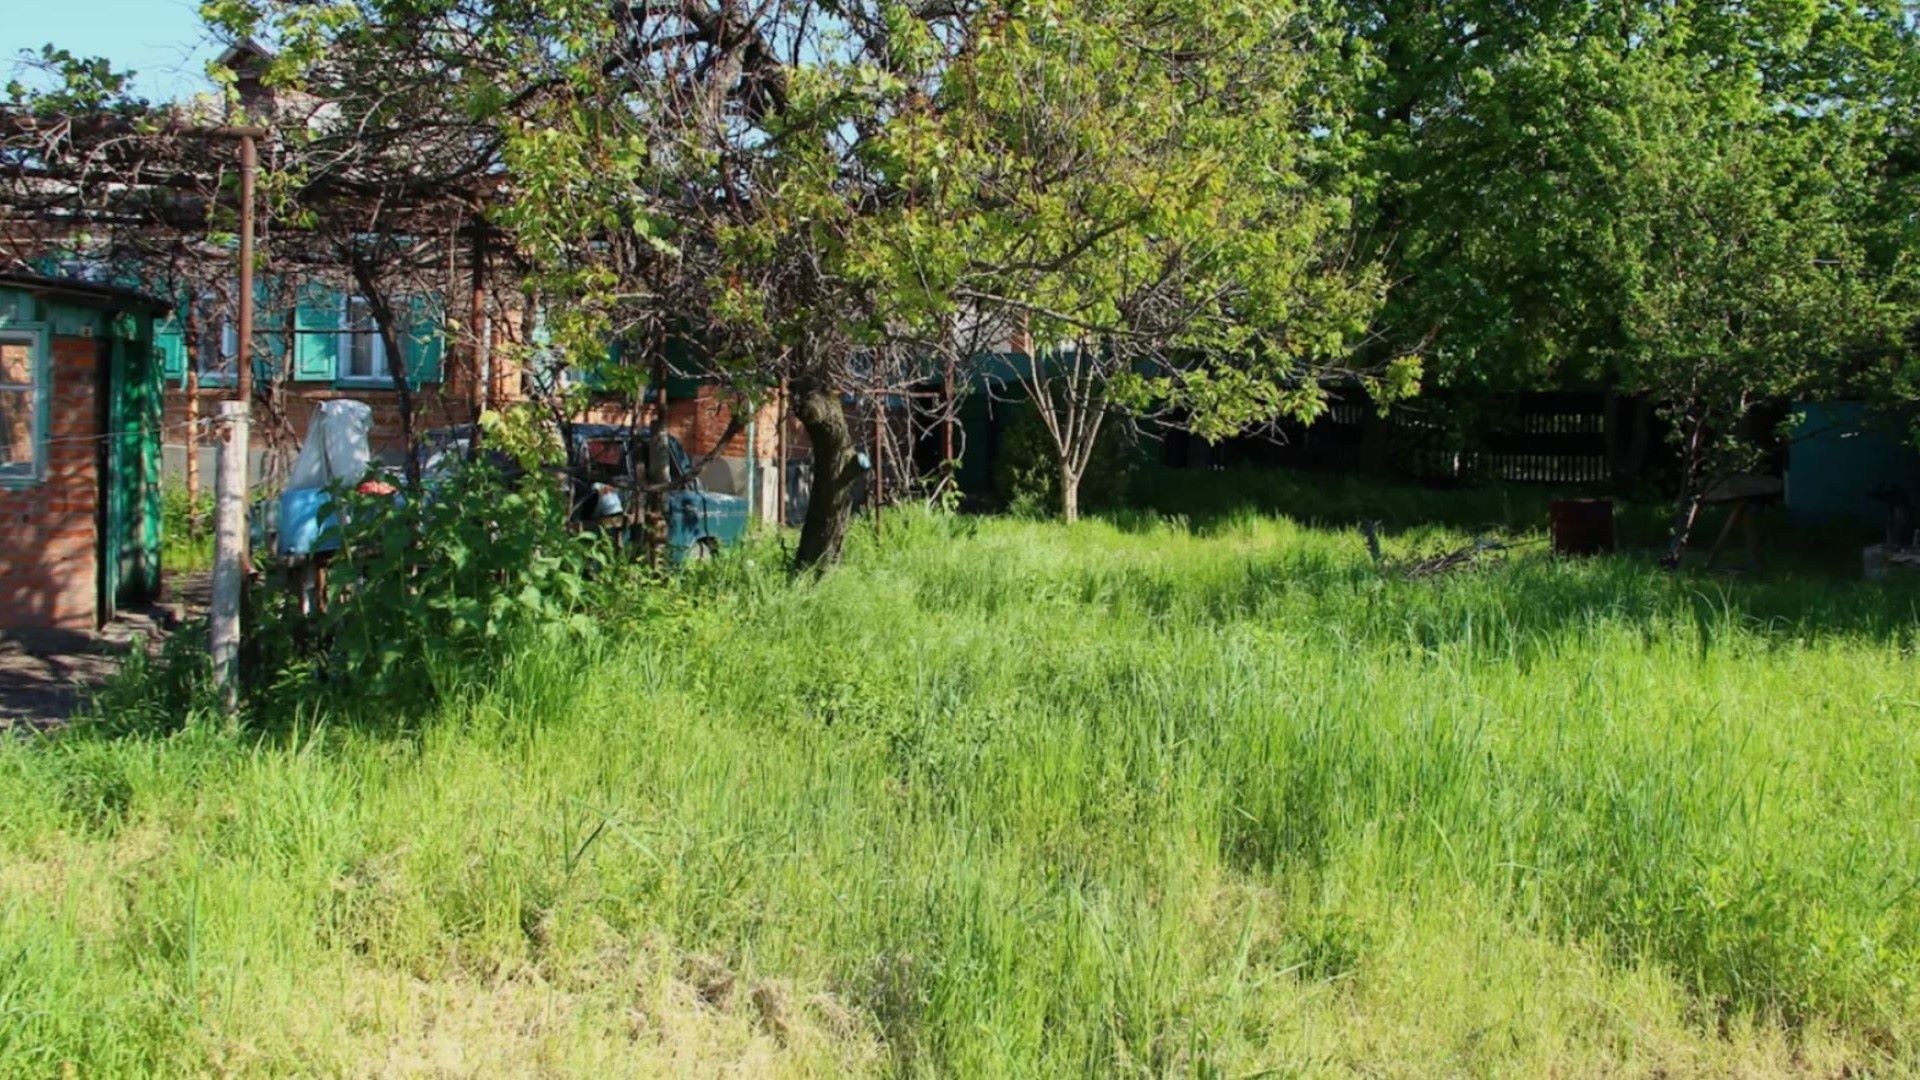  New homeowner frustrated after highly invasive plant sprouts up in backyard: 'My house is littered with it' 